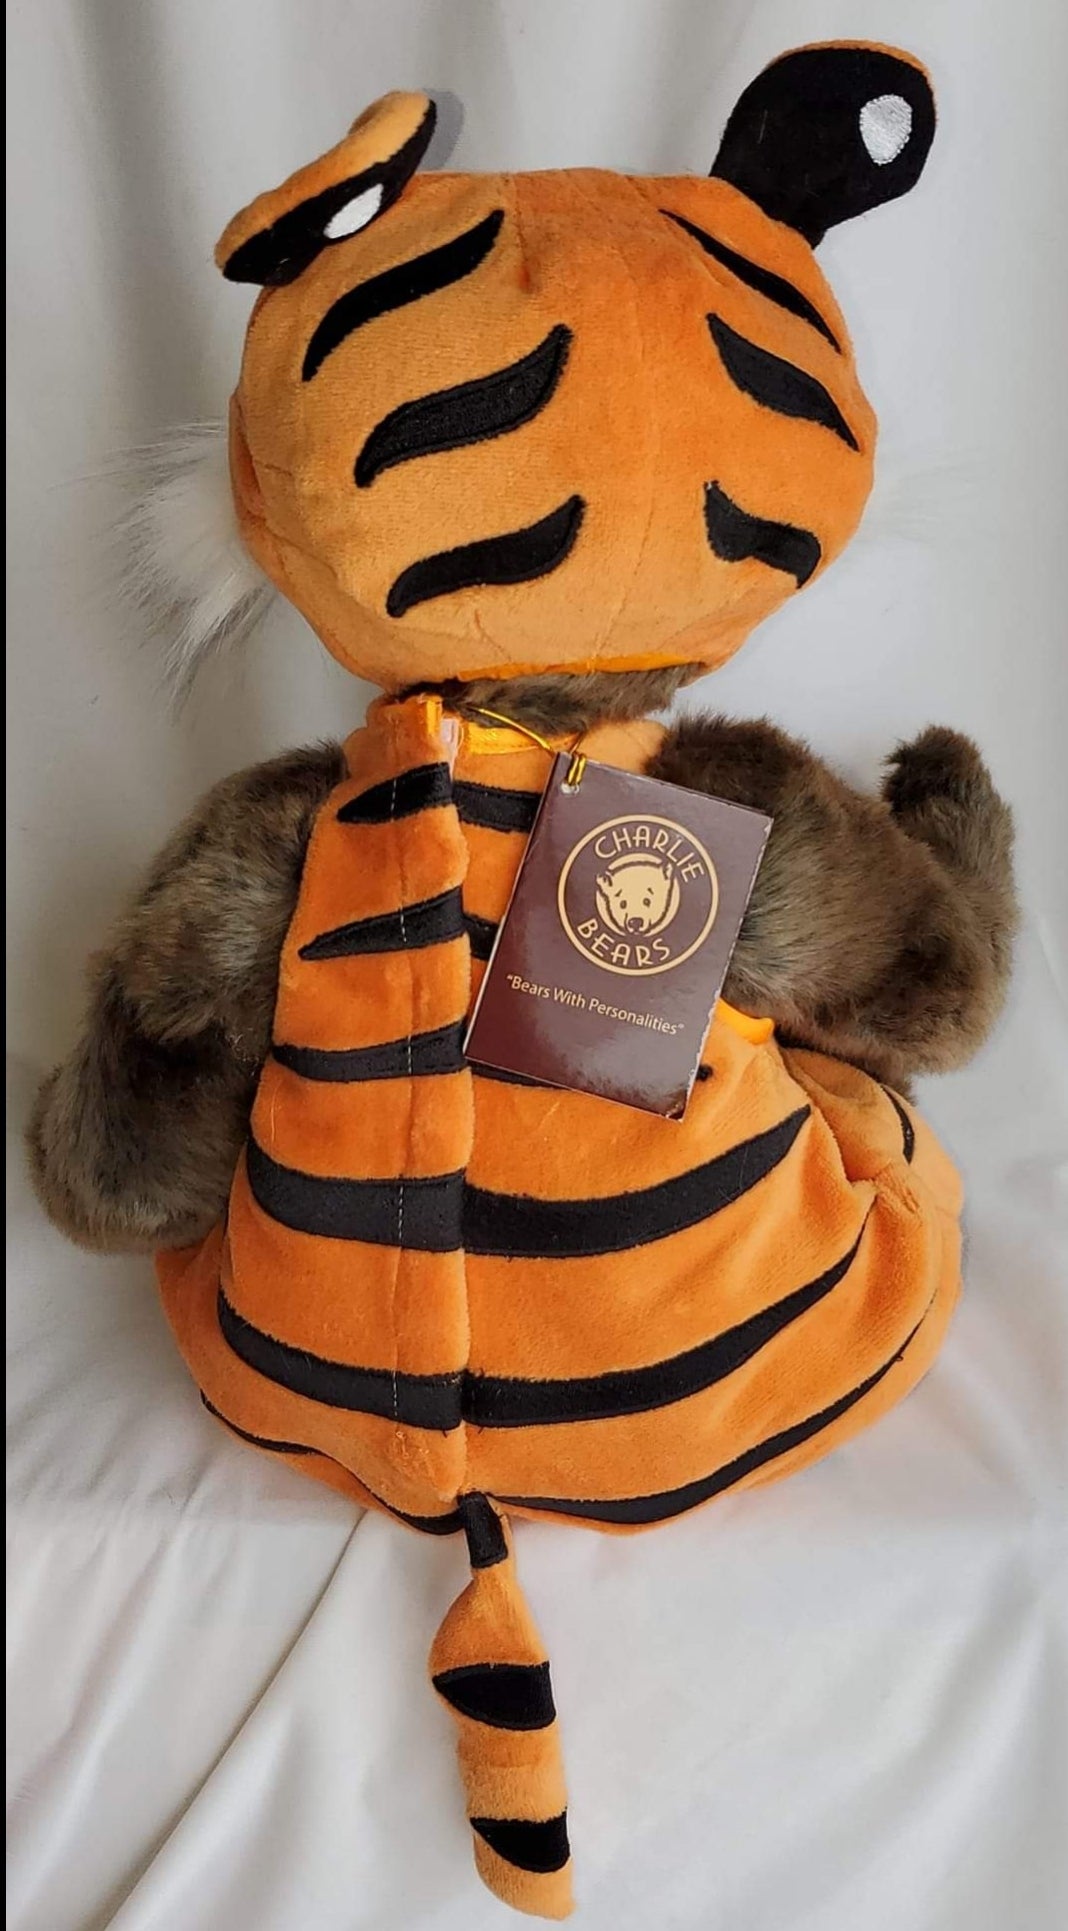 Nod - 16" Bear in Removable Tiger Jammies by Charlie Bears